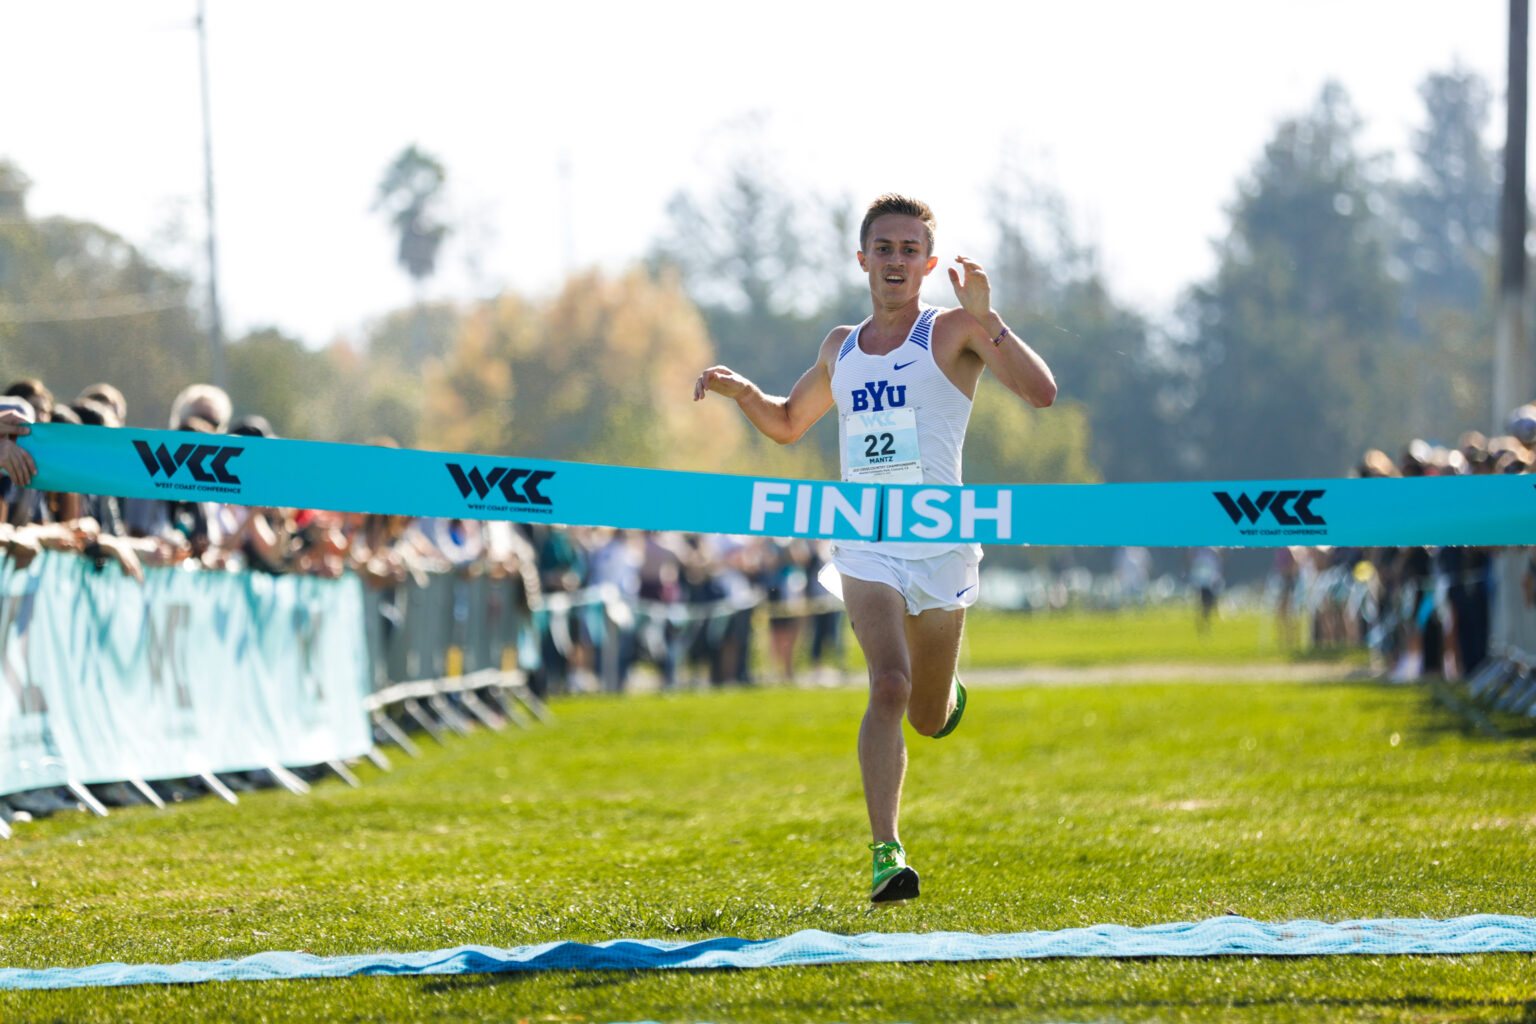 BYU cross country sweeps WCC Championship...again